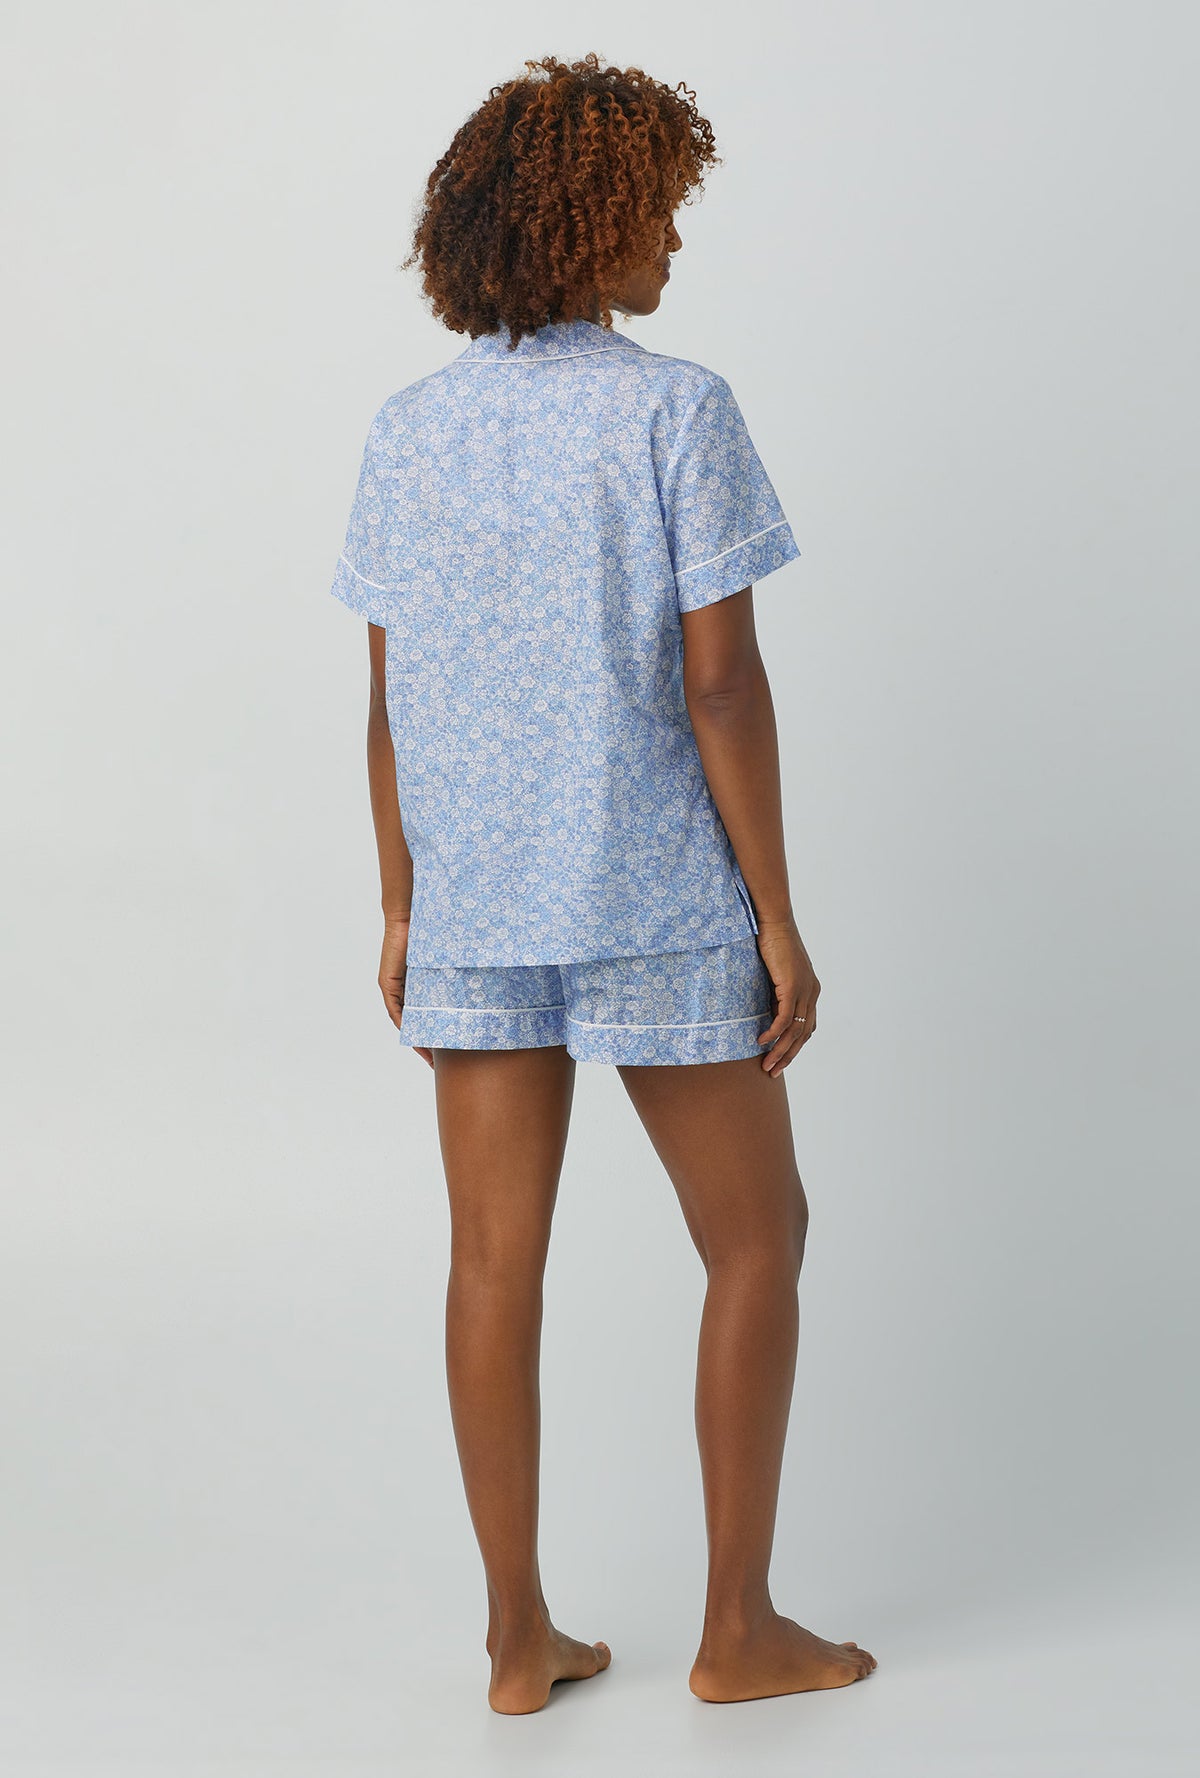 A lady wearing Short Sleeve Classic Woven Cotton Silk PJ Set with something blue print